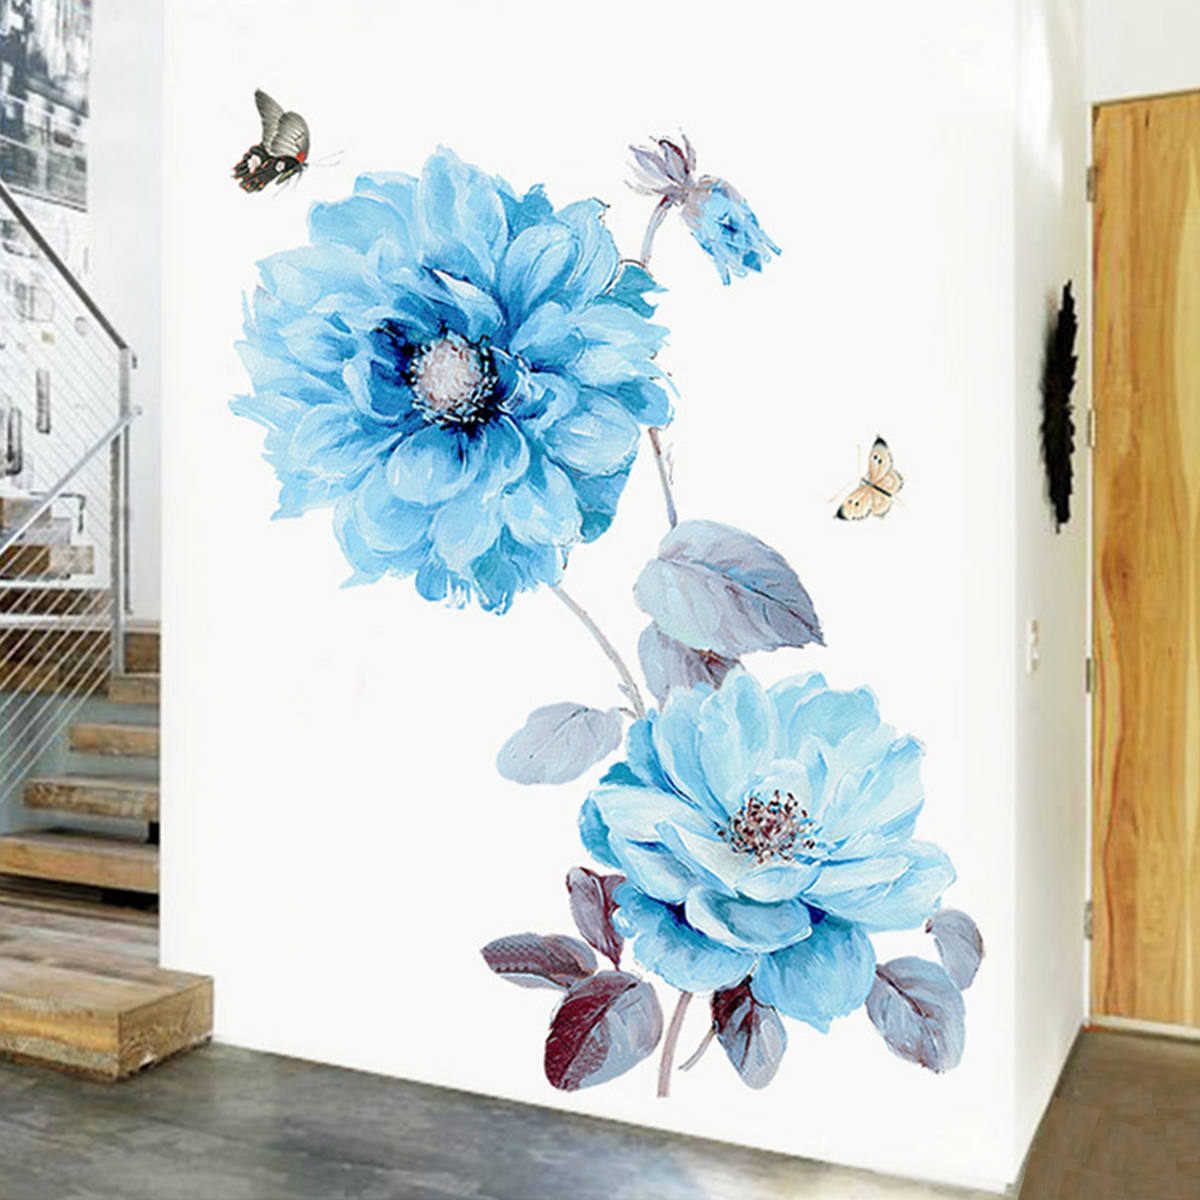 Blue-Flowers-Wall-Sticker-Room-Sticker-Living-Room-Background-Bedroom-Decorations-1524262-2